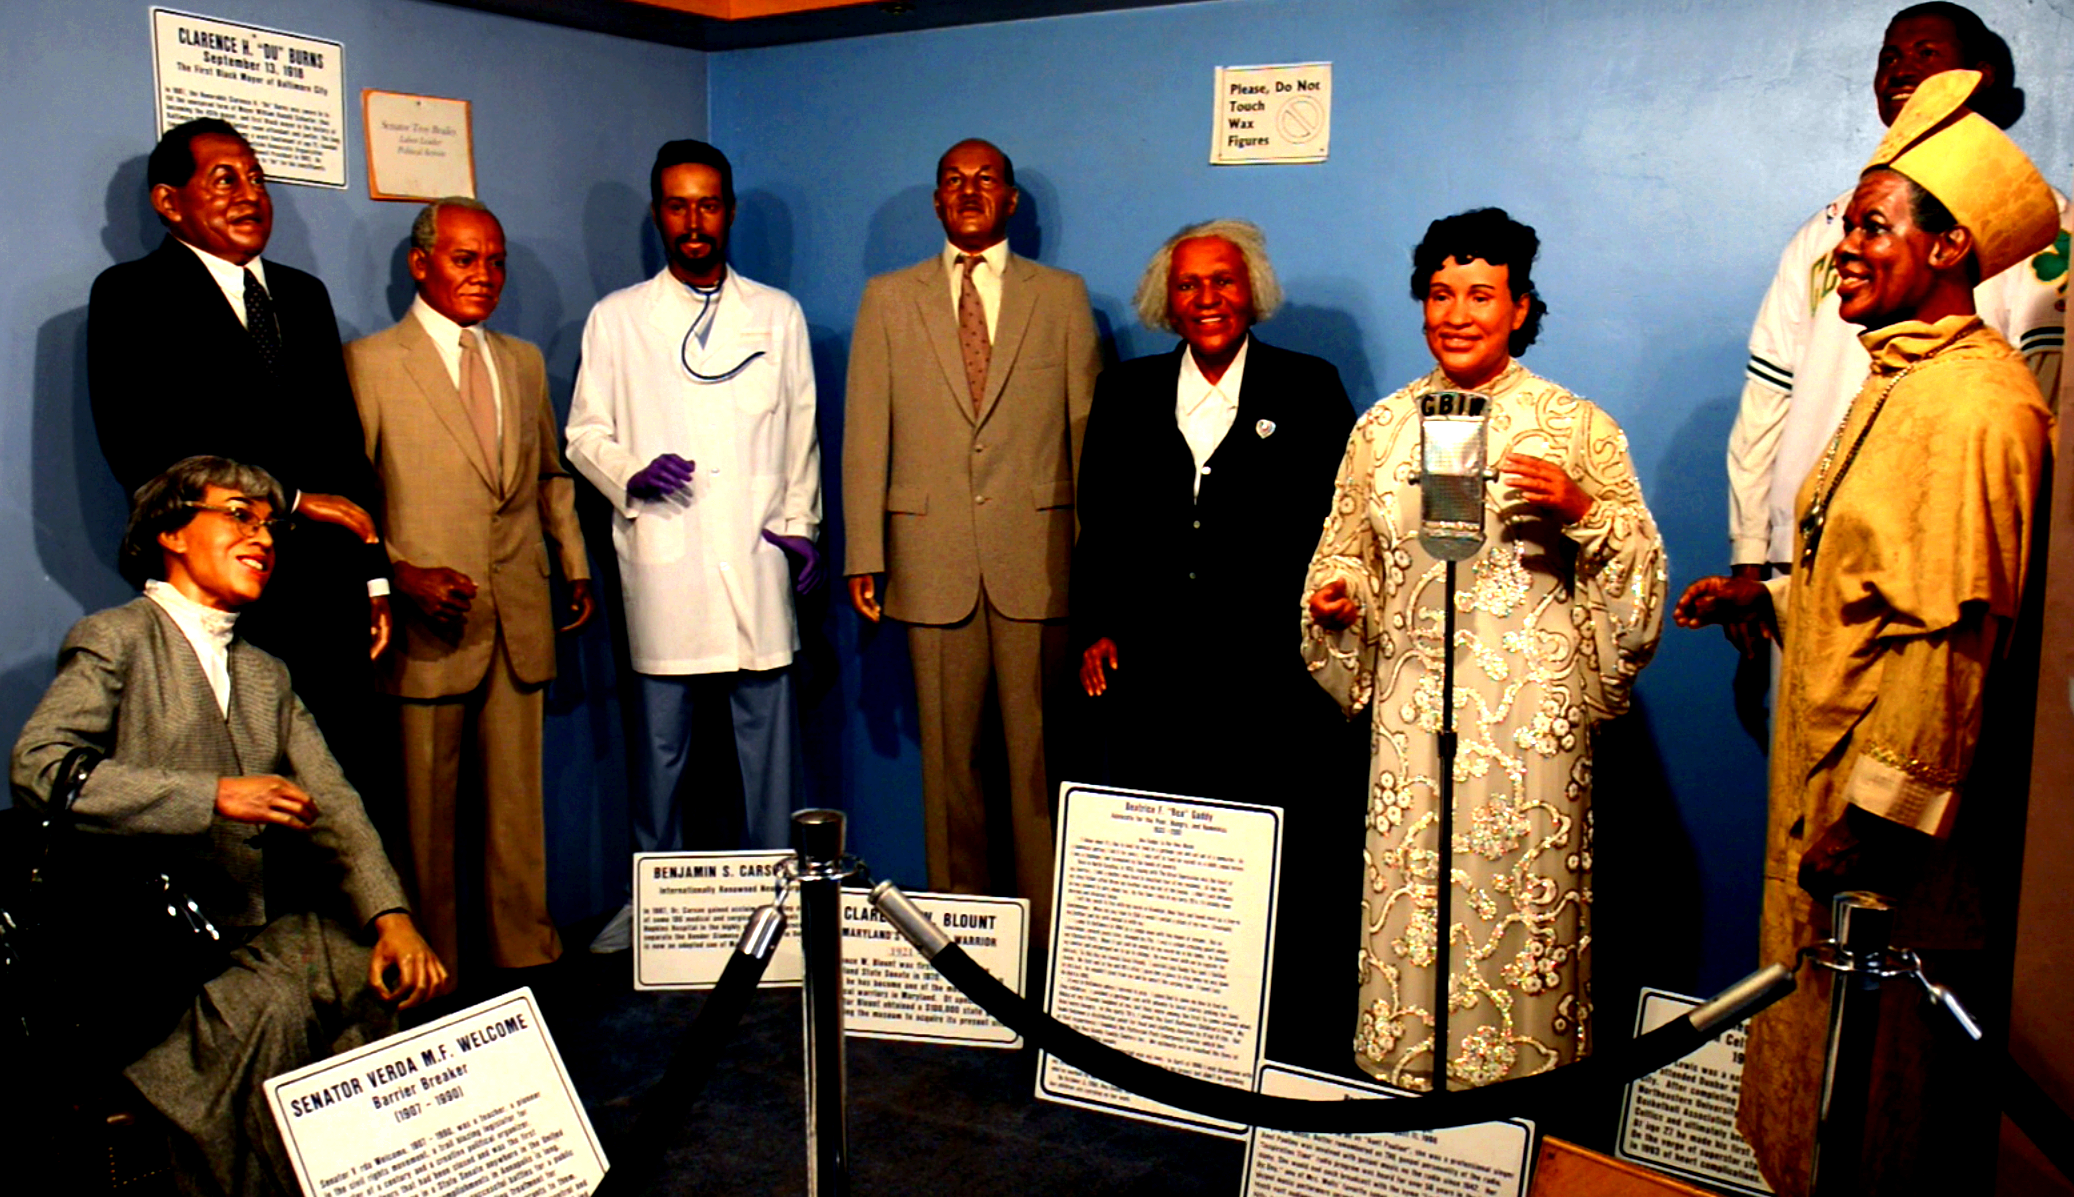 National great blacks in wax museum impossible to overstate the